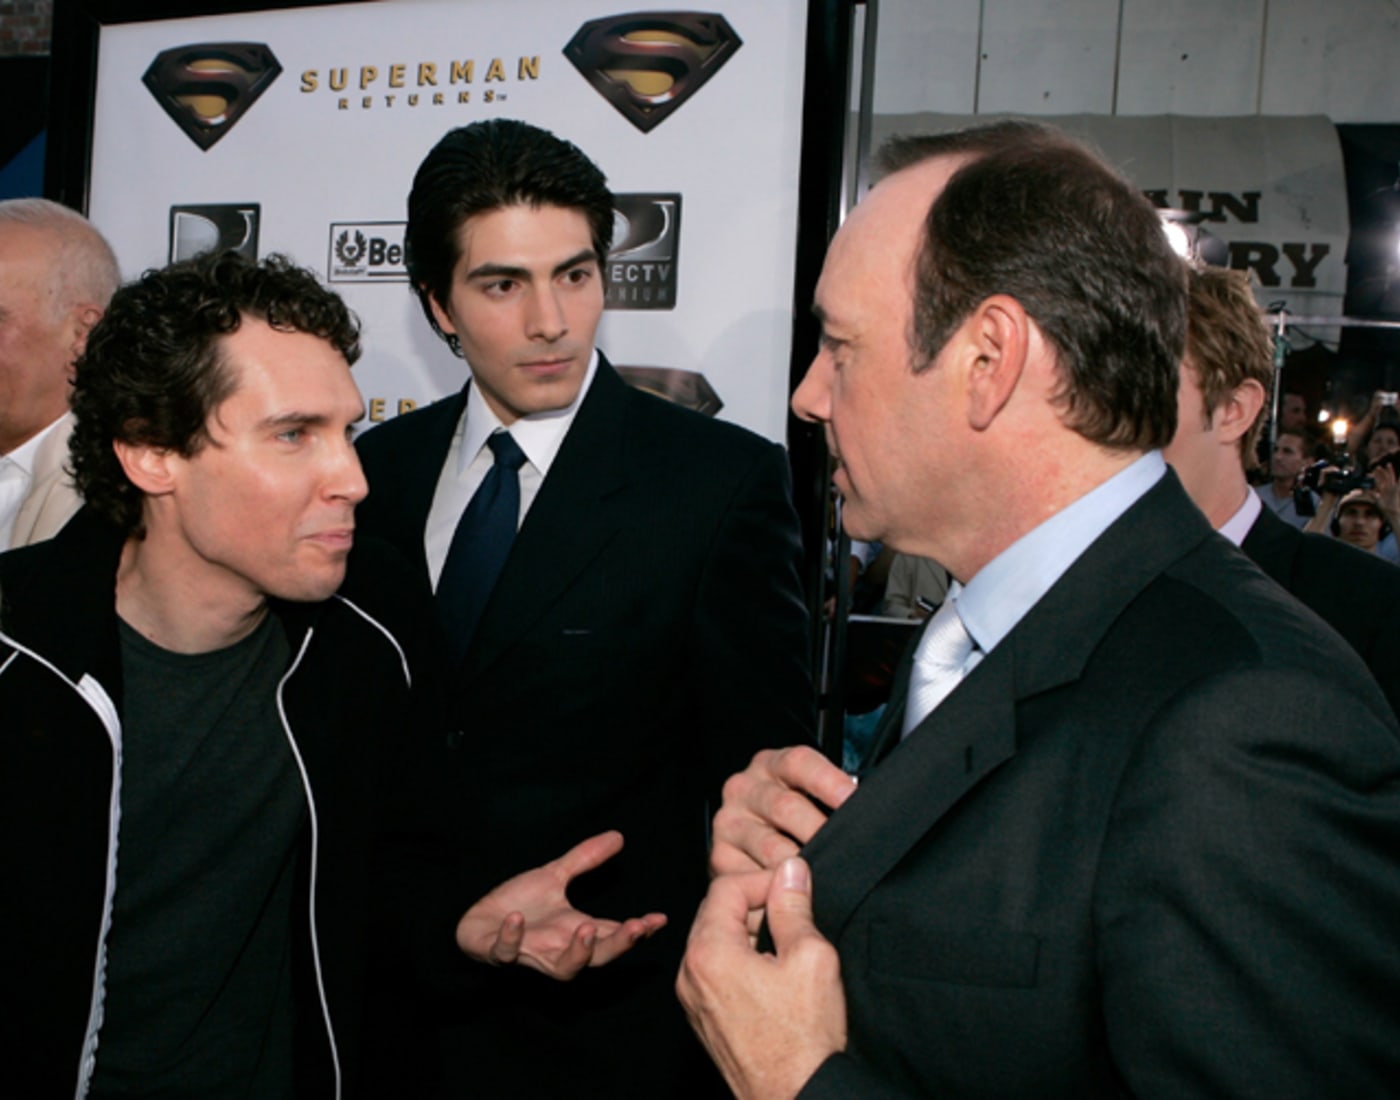 Bryan Singer, Brandon Routh and Kevin Spacey at 'Superman Returns' premiere